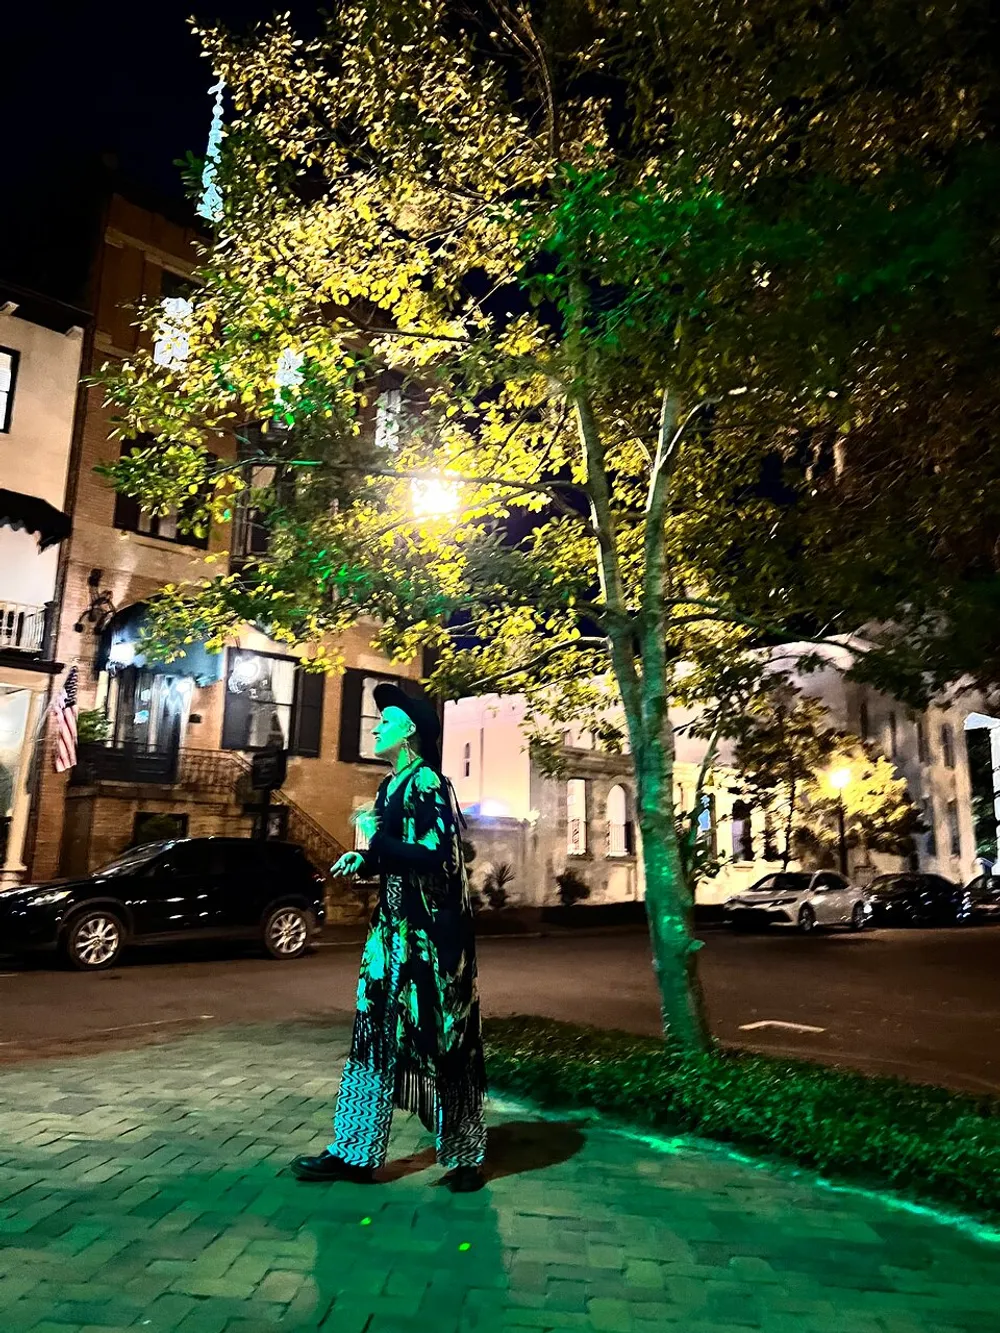 A person stands bathed in green light on a city street at night with a backdrop of illuminated trees and buildings